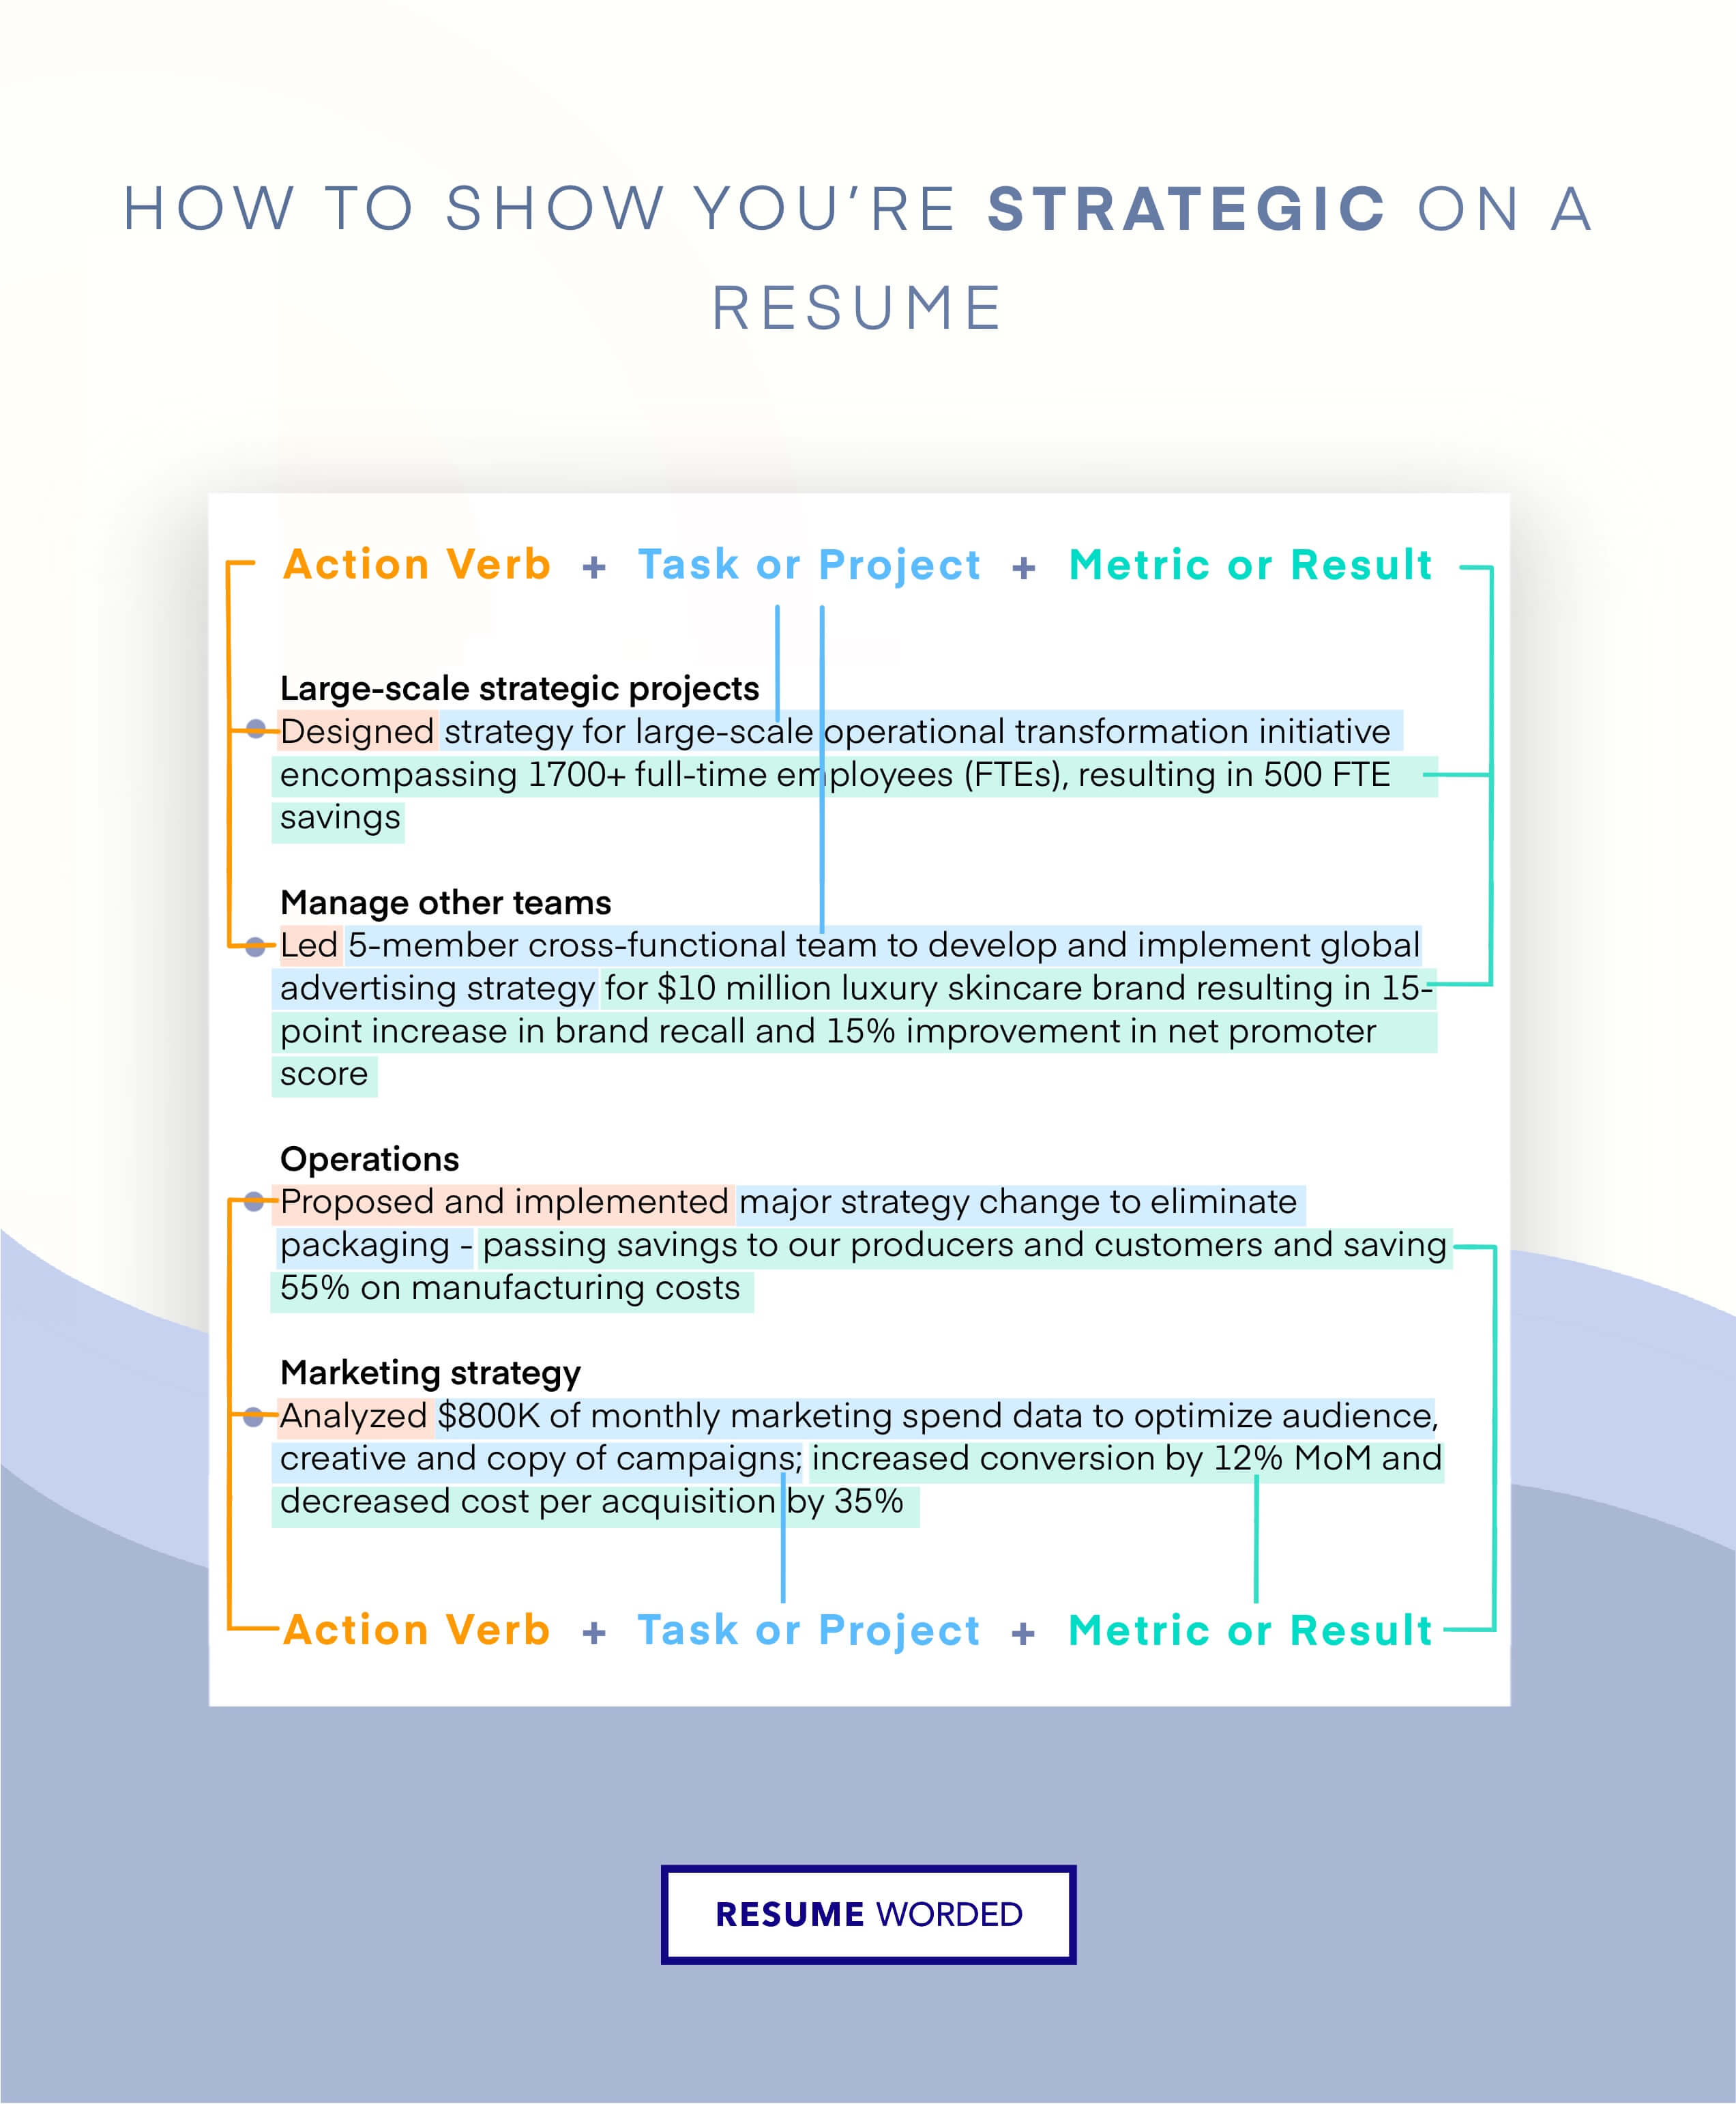 Emphasize process and strategy improvements - Sales Operations Manager CV